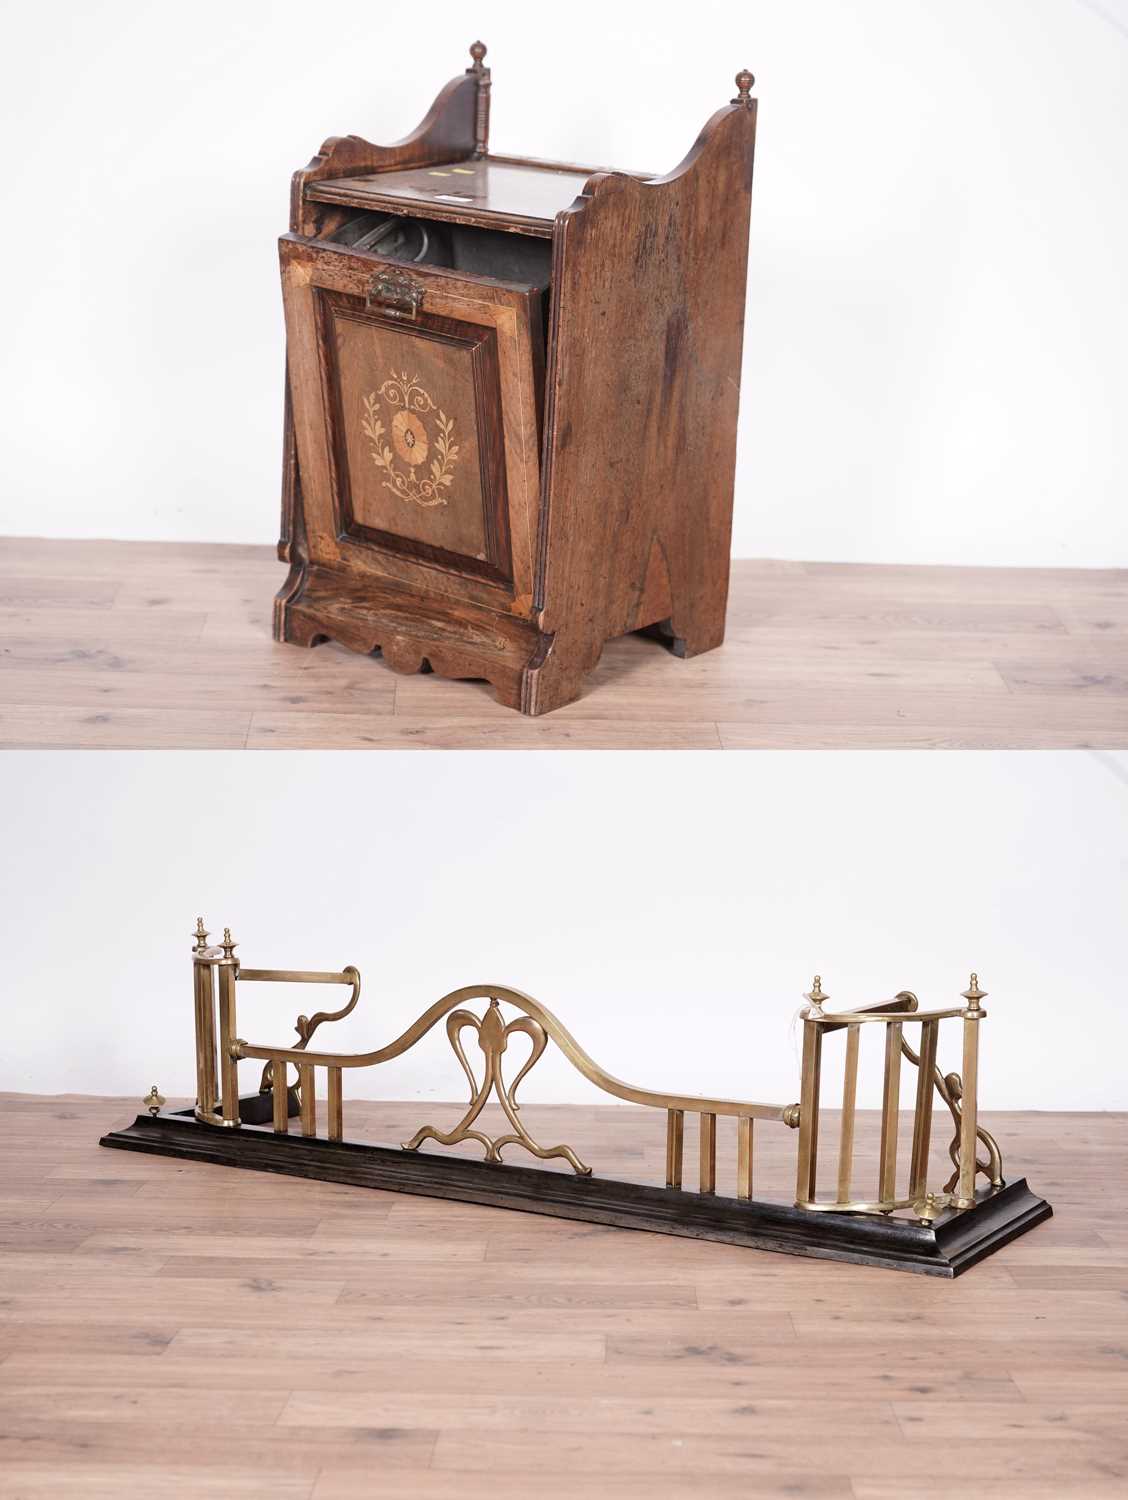 An Arts & Crafts brass and cast-iron fire fender; and an Edwardian inlaid walnut coal scuttle